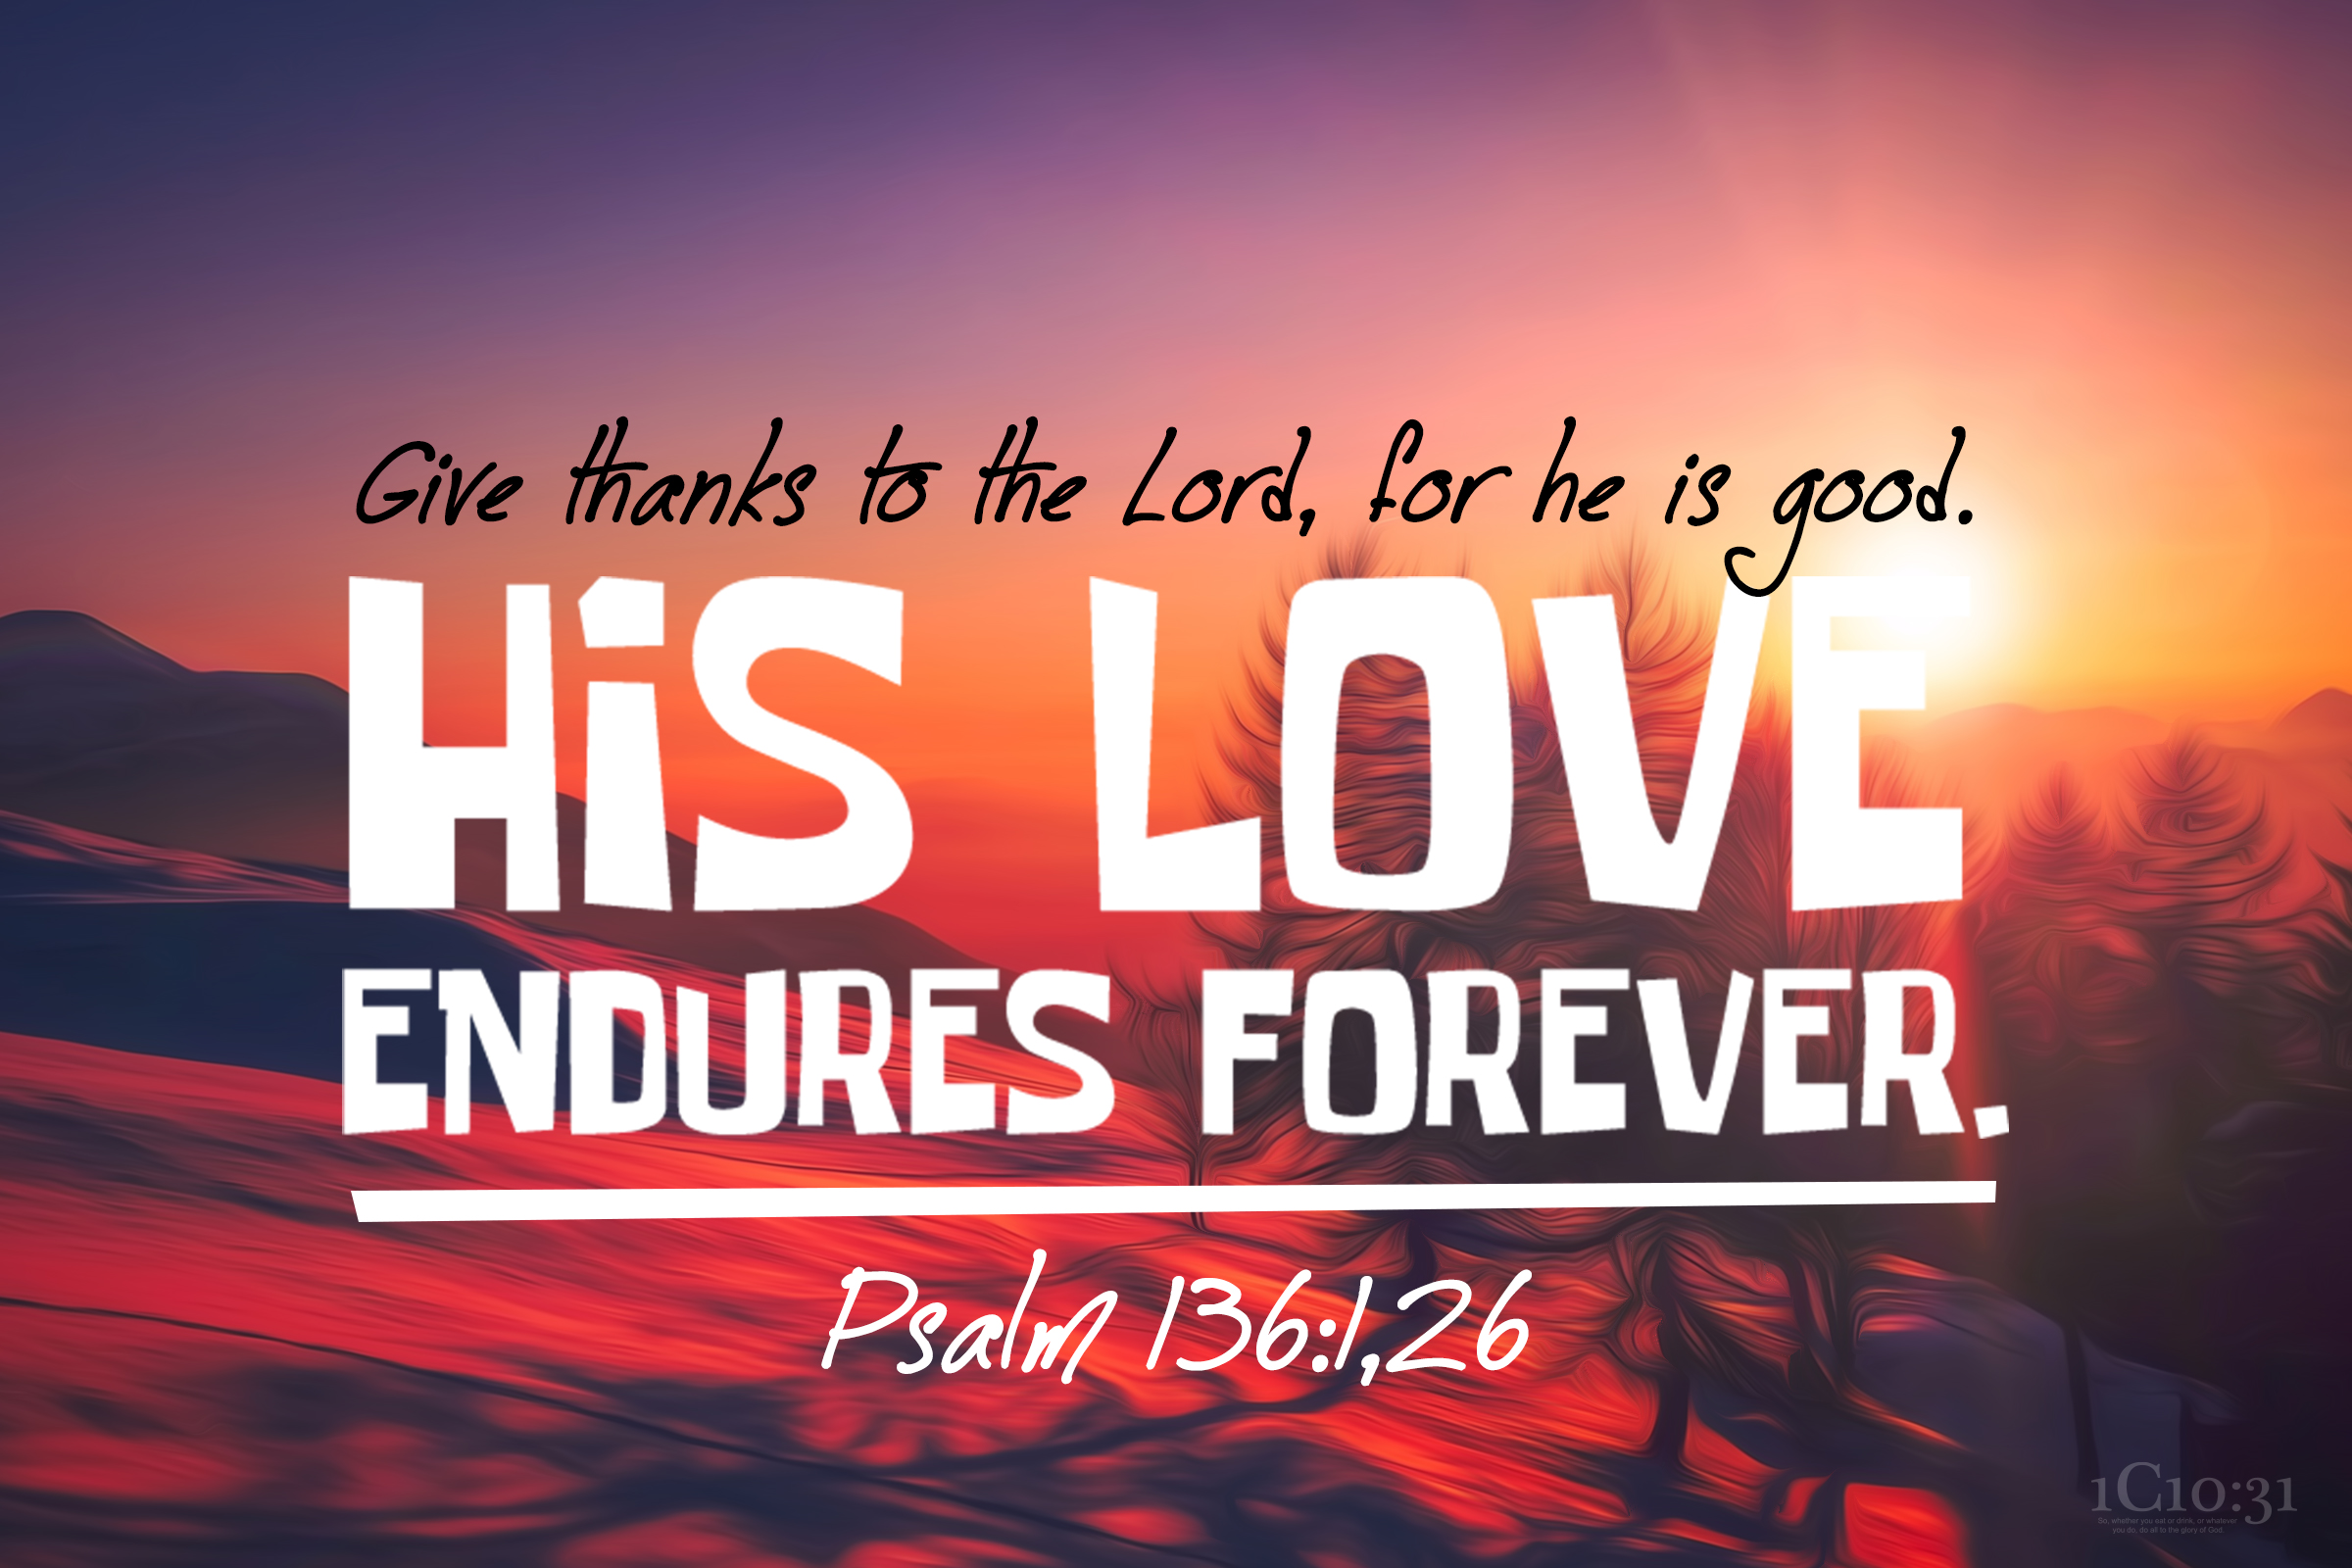 Psalm 136:1,26 - Give thanks to the Lord, for he is good. His love endures forever.